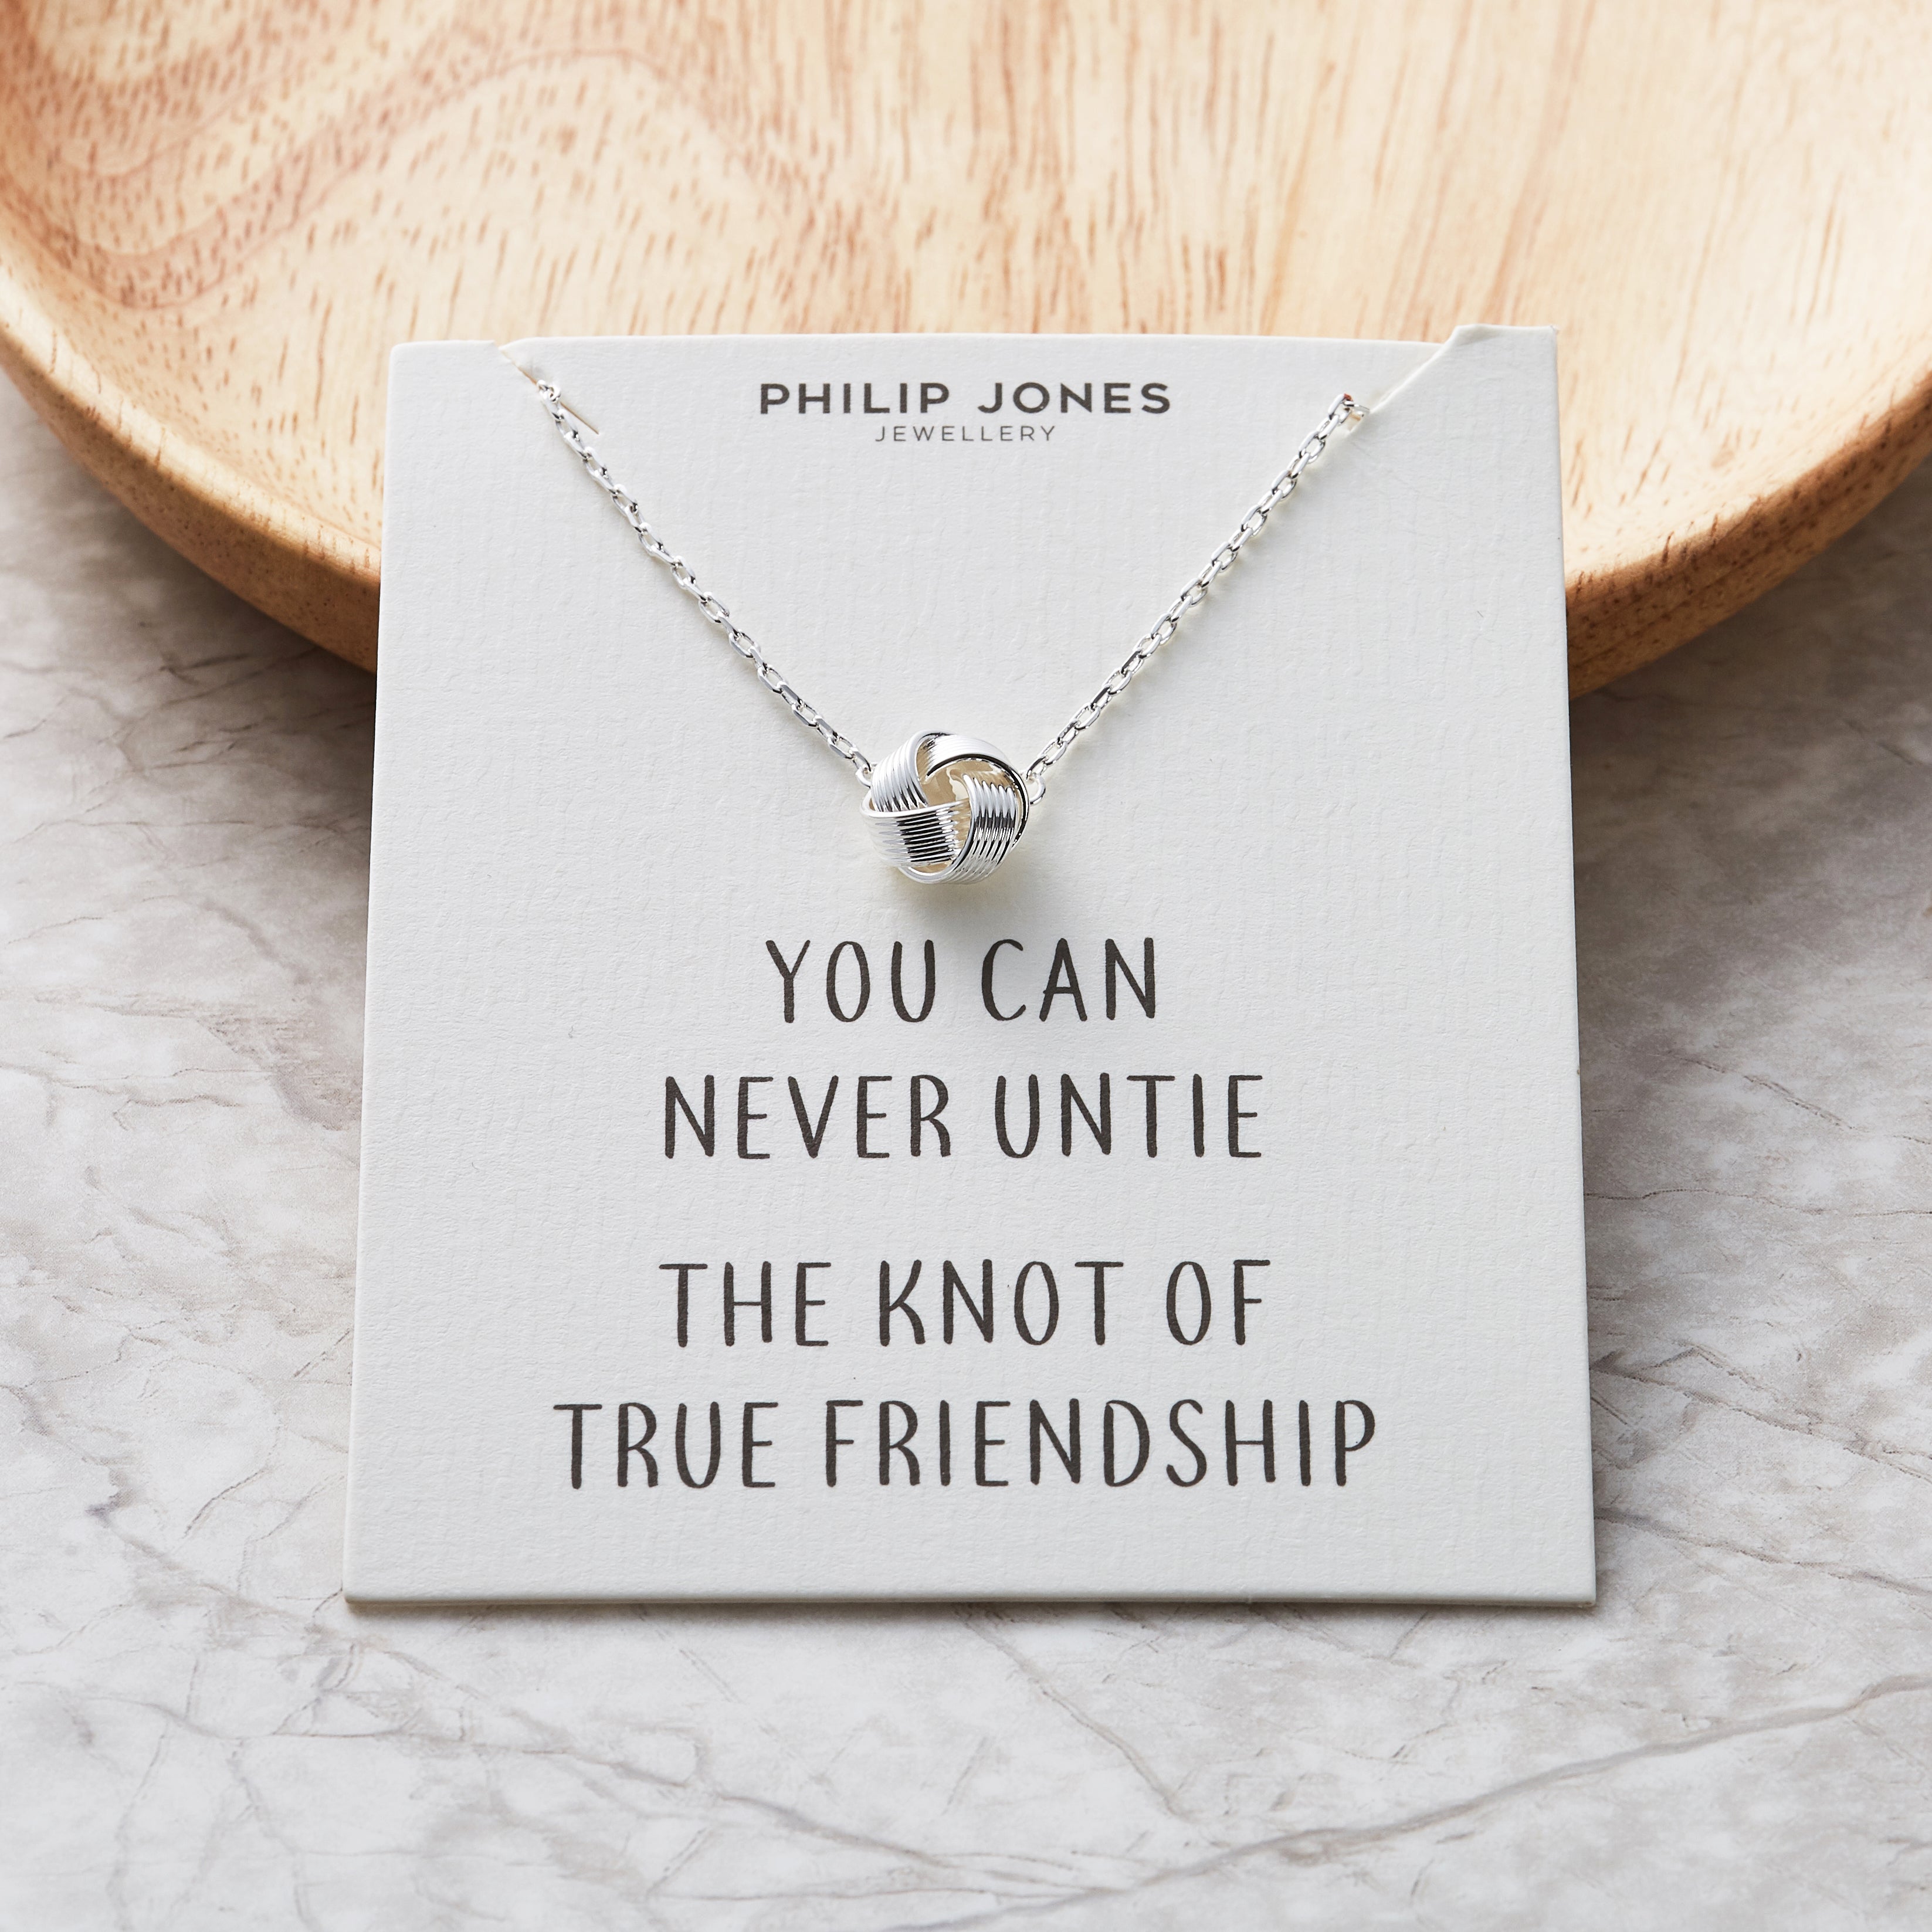 Silver Plated Love Knot Necklace with Quote Card